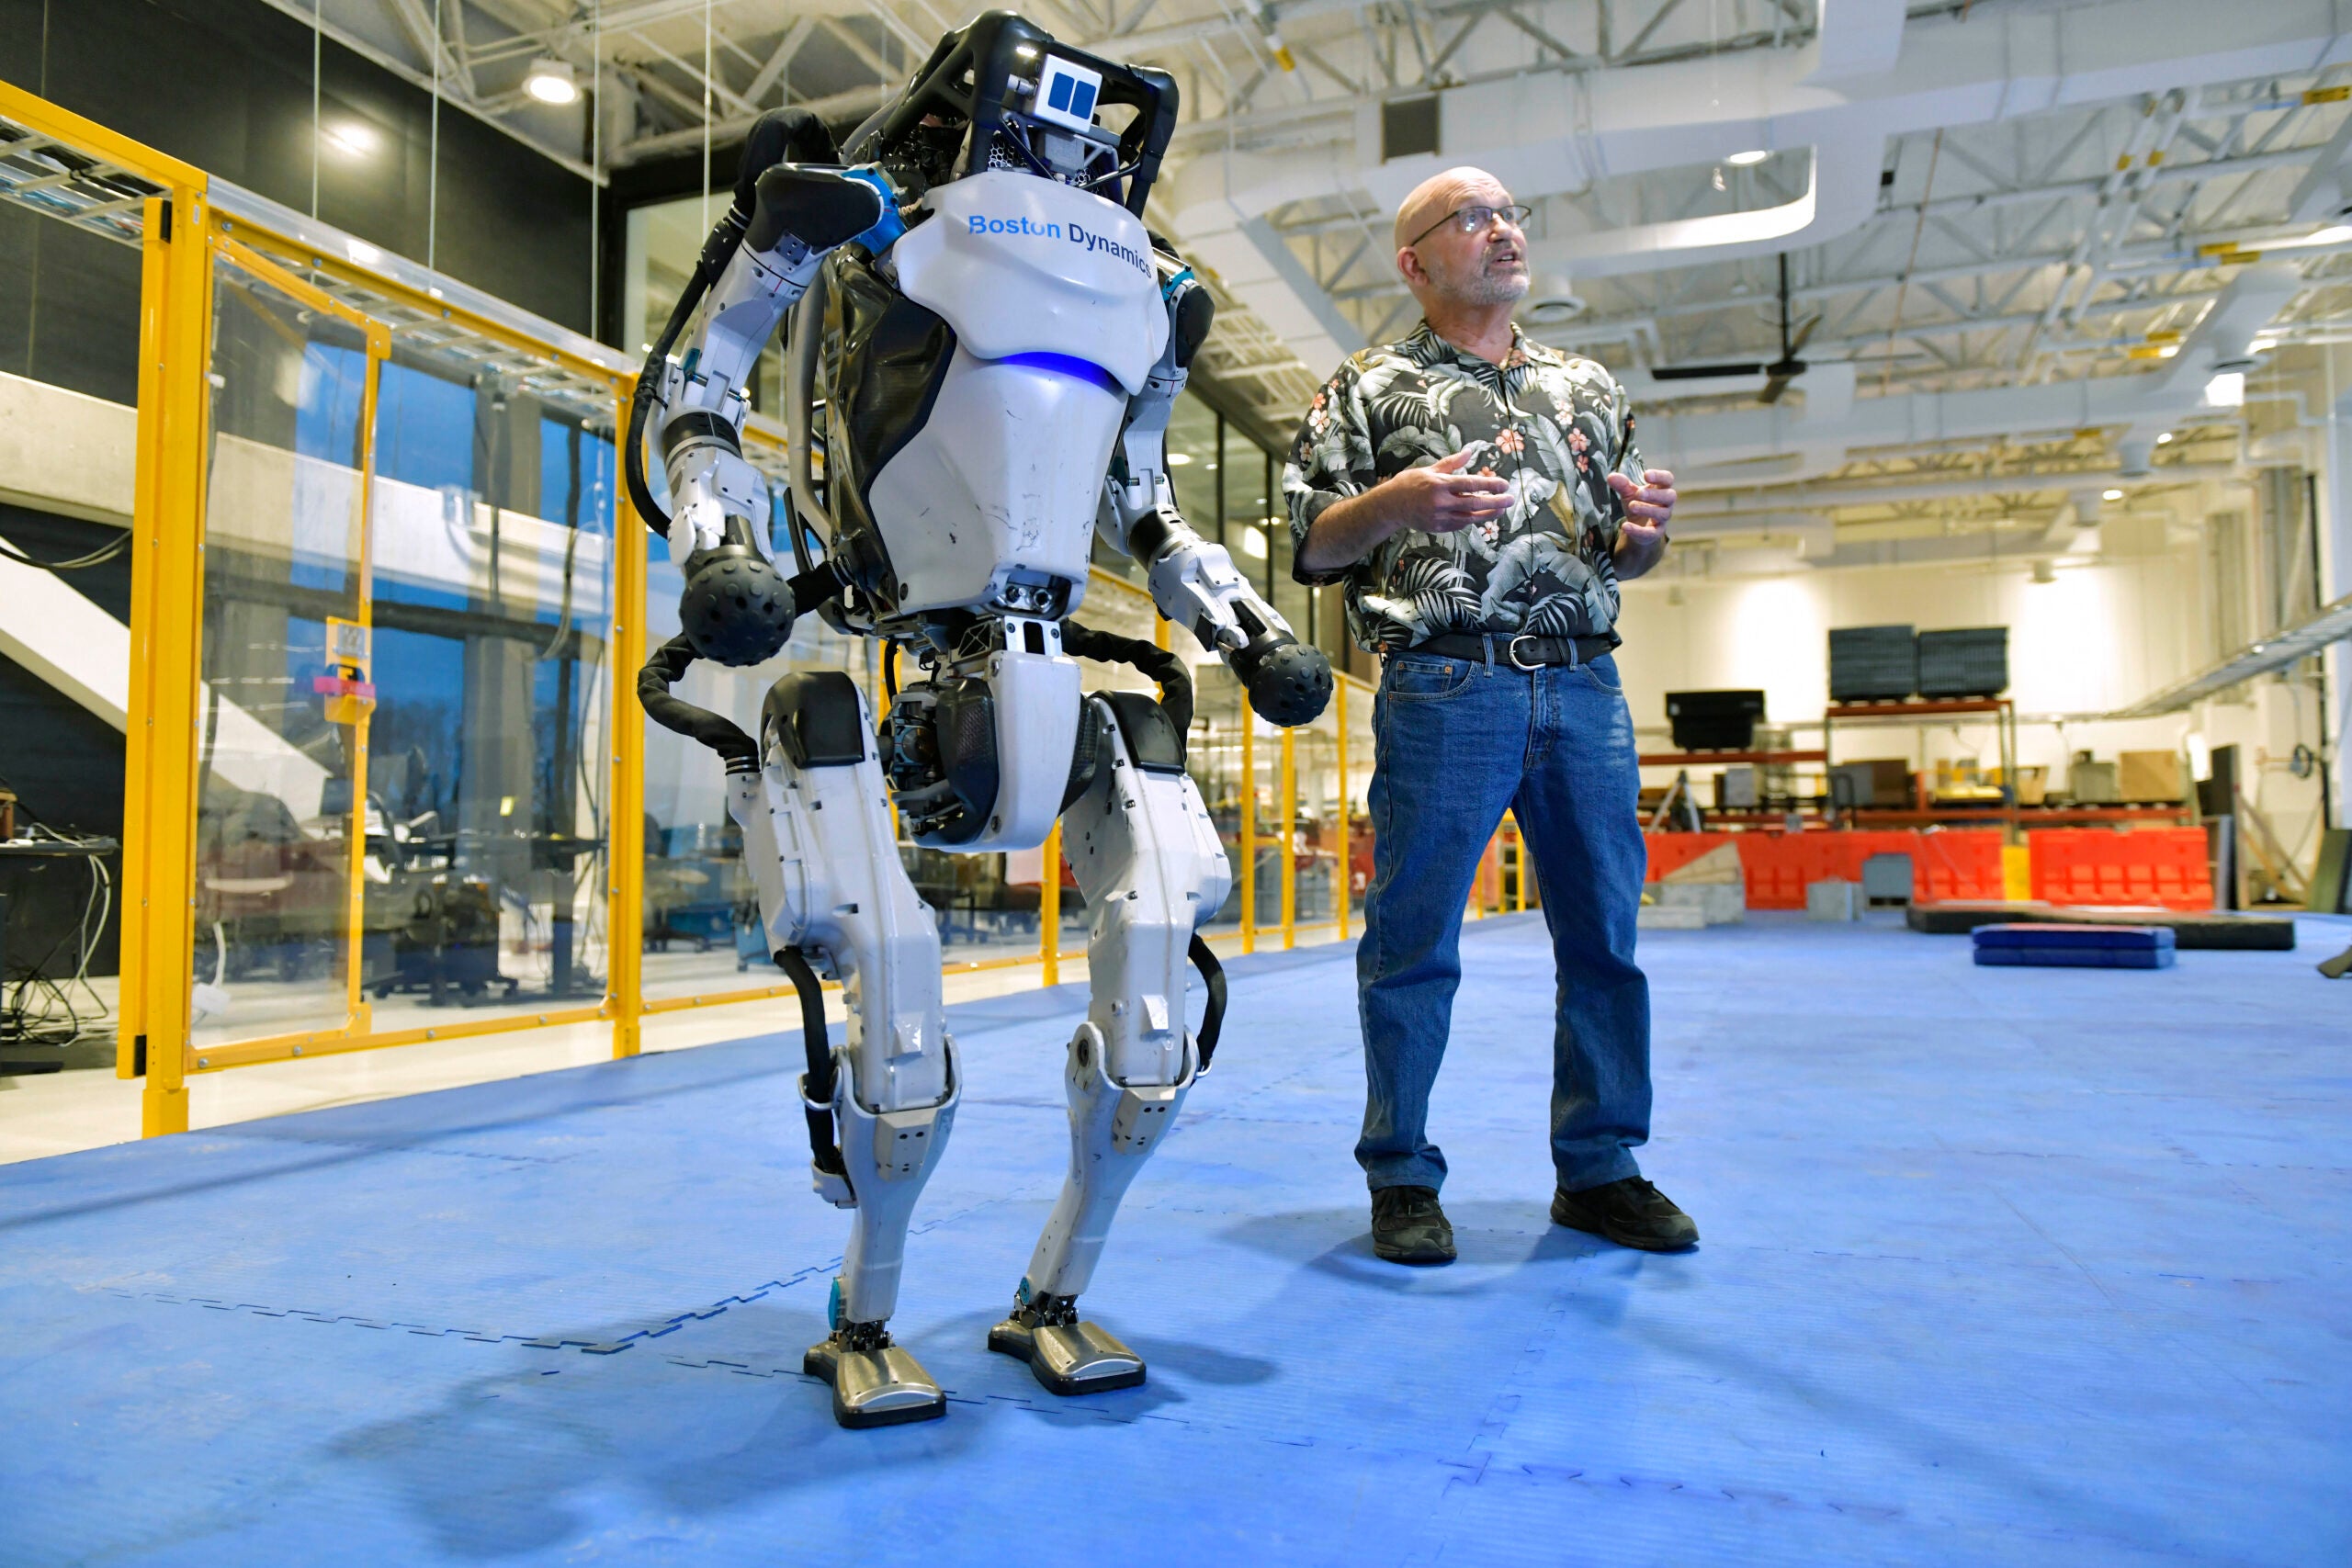 These dancing Boston Dynamics robots have been watched over Here's story behind the viral video.